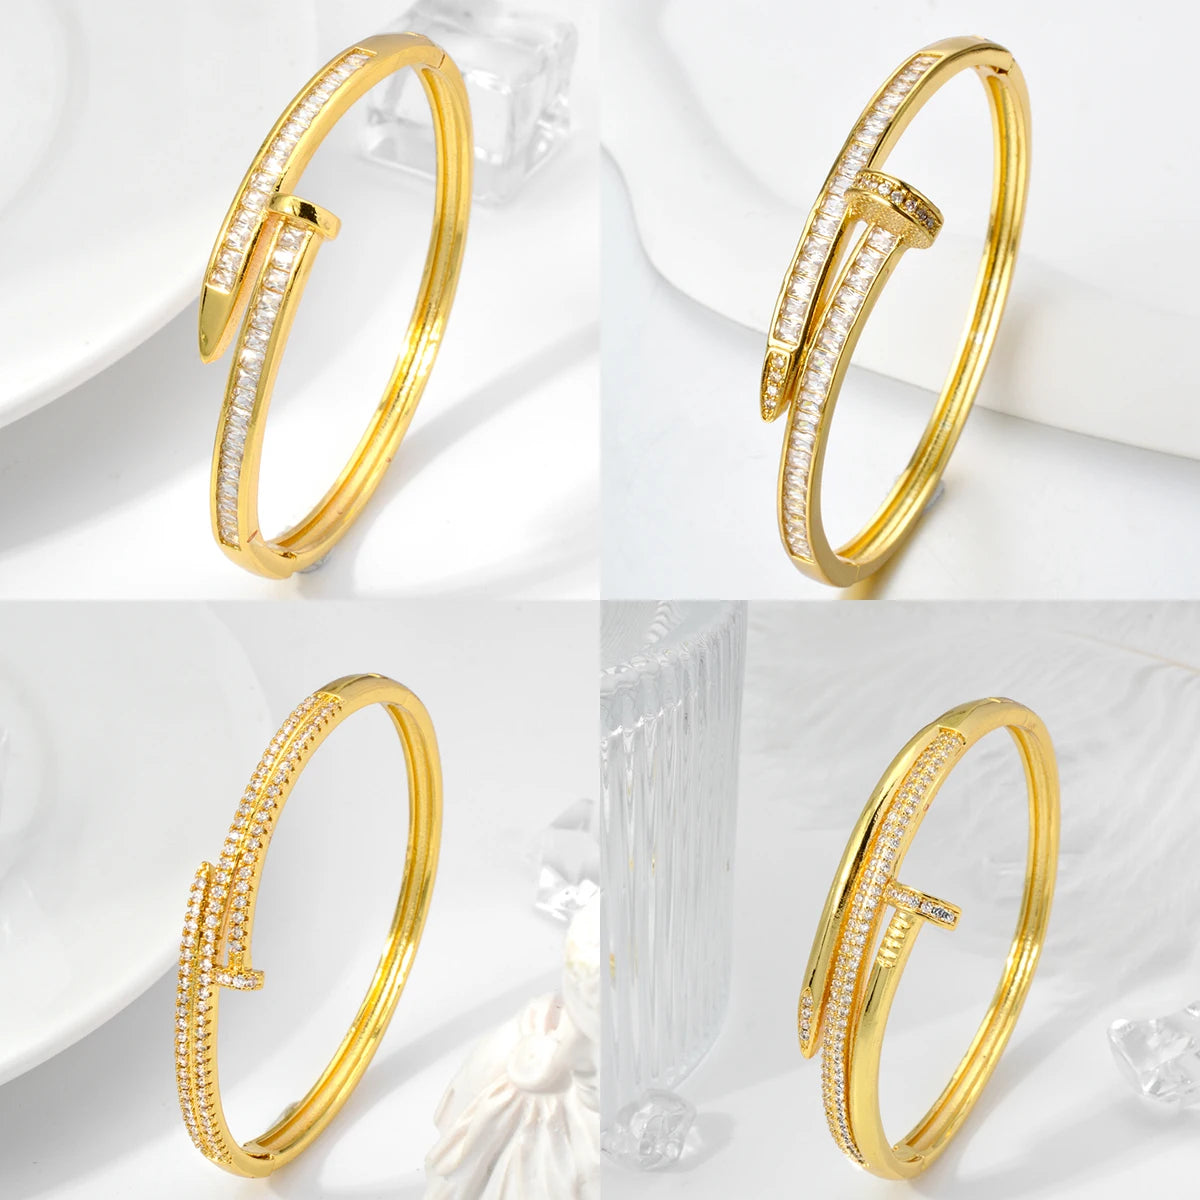 Unique Nail Head Cross Bangle Luxury Gold Color Twist Bracelets For Women Men Statement Jewelry Birthday Gifts Dropshipping